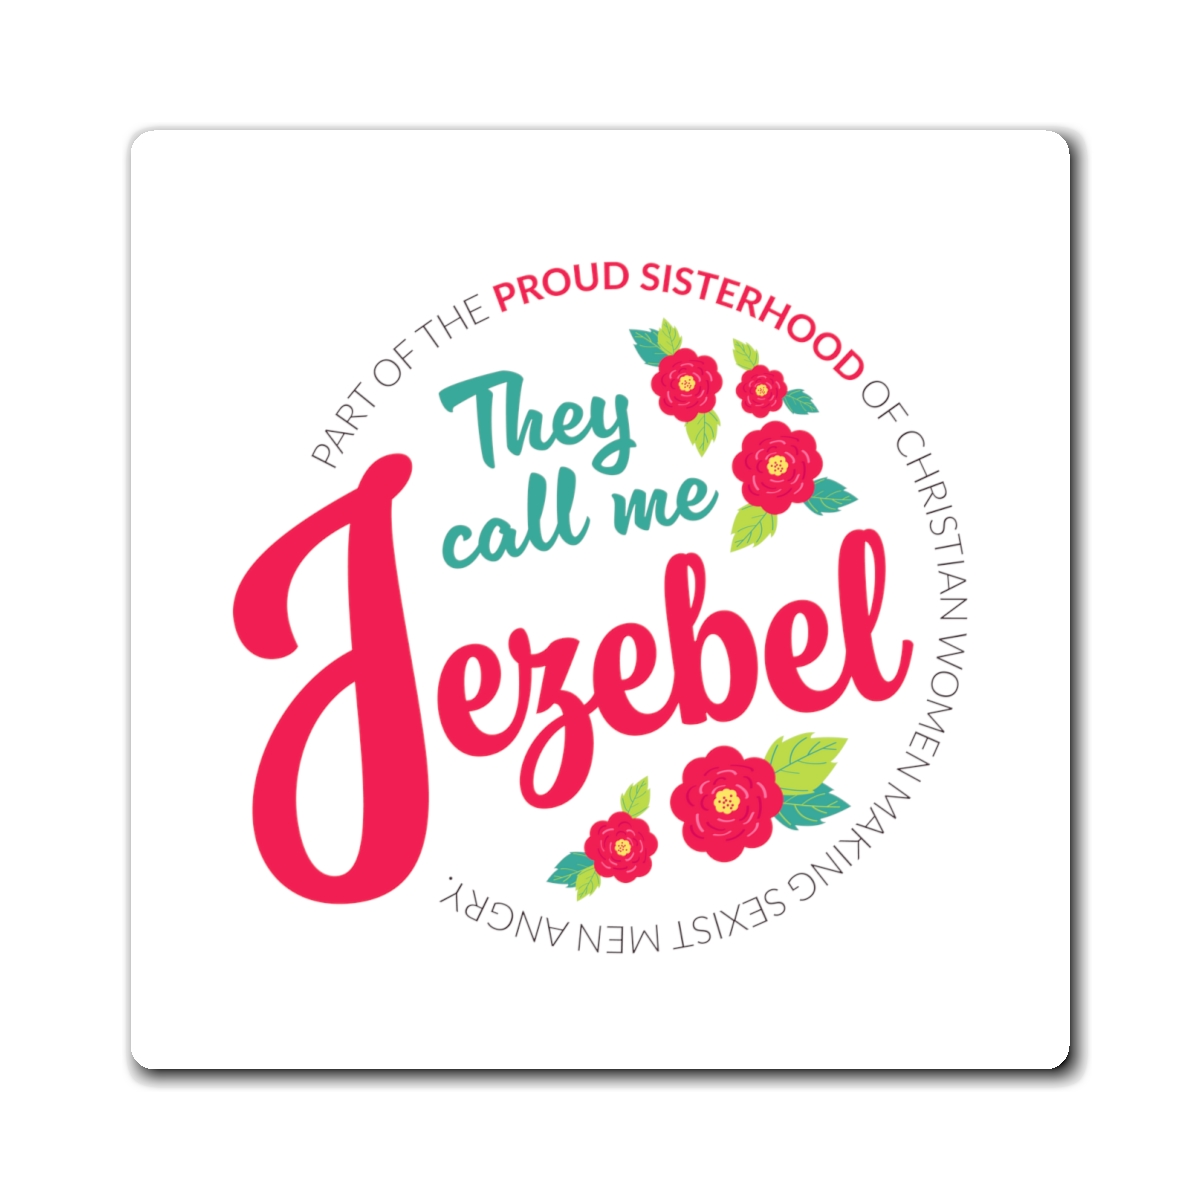 Seems like a good time to let y'all know that we have 'They Call Me Jezebel' merch! sheilawraygregoire.com/product-catego…